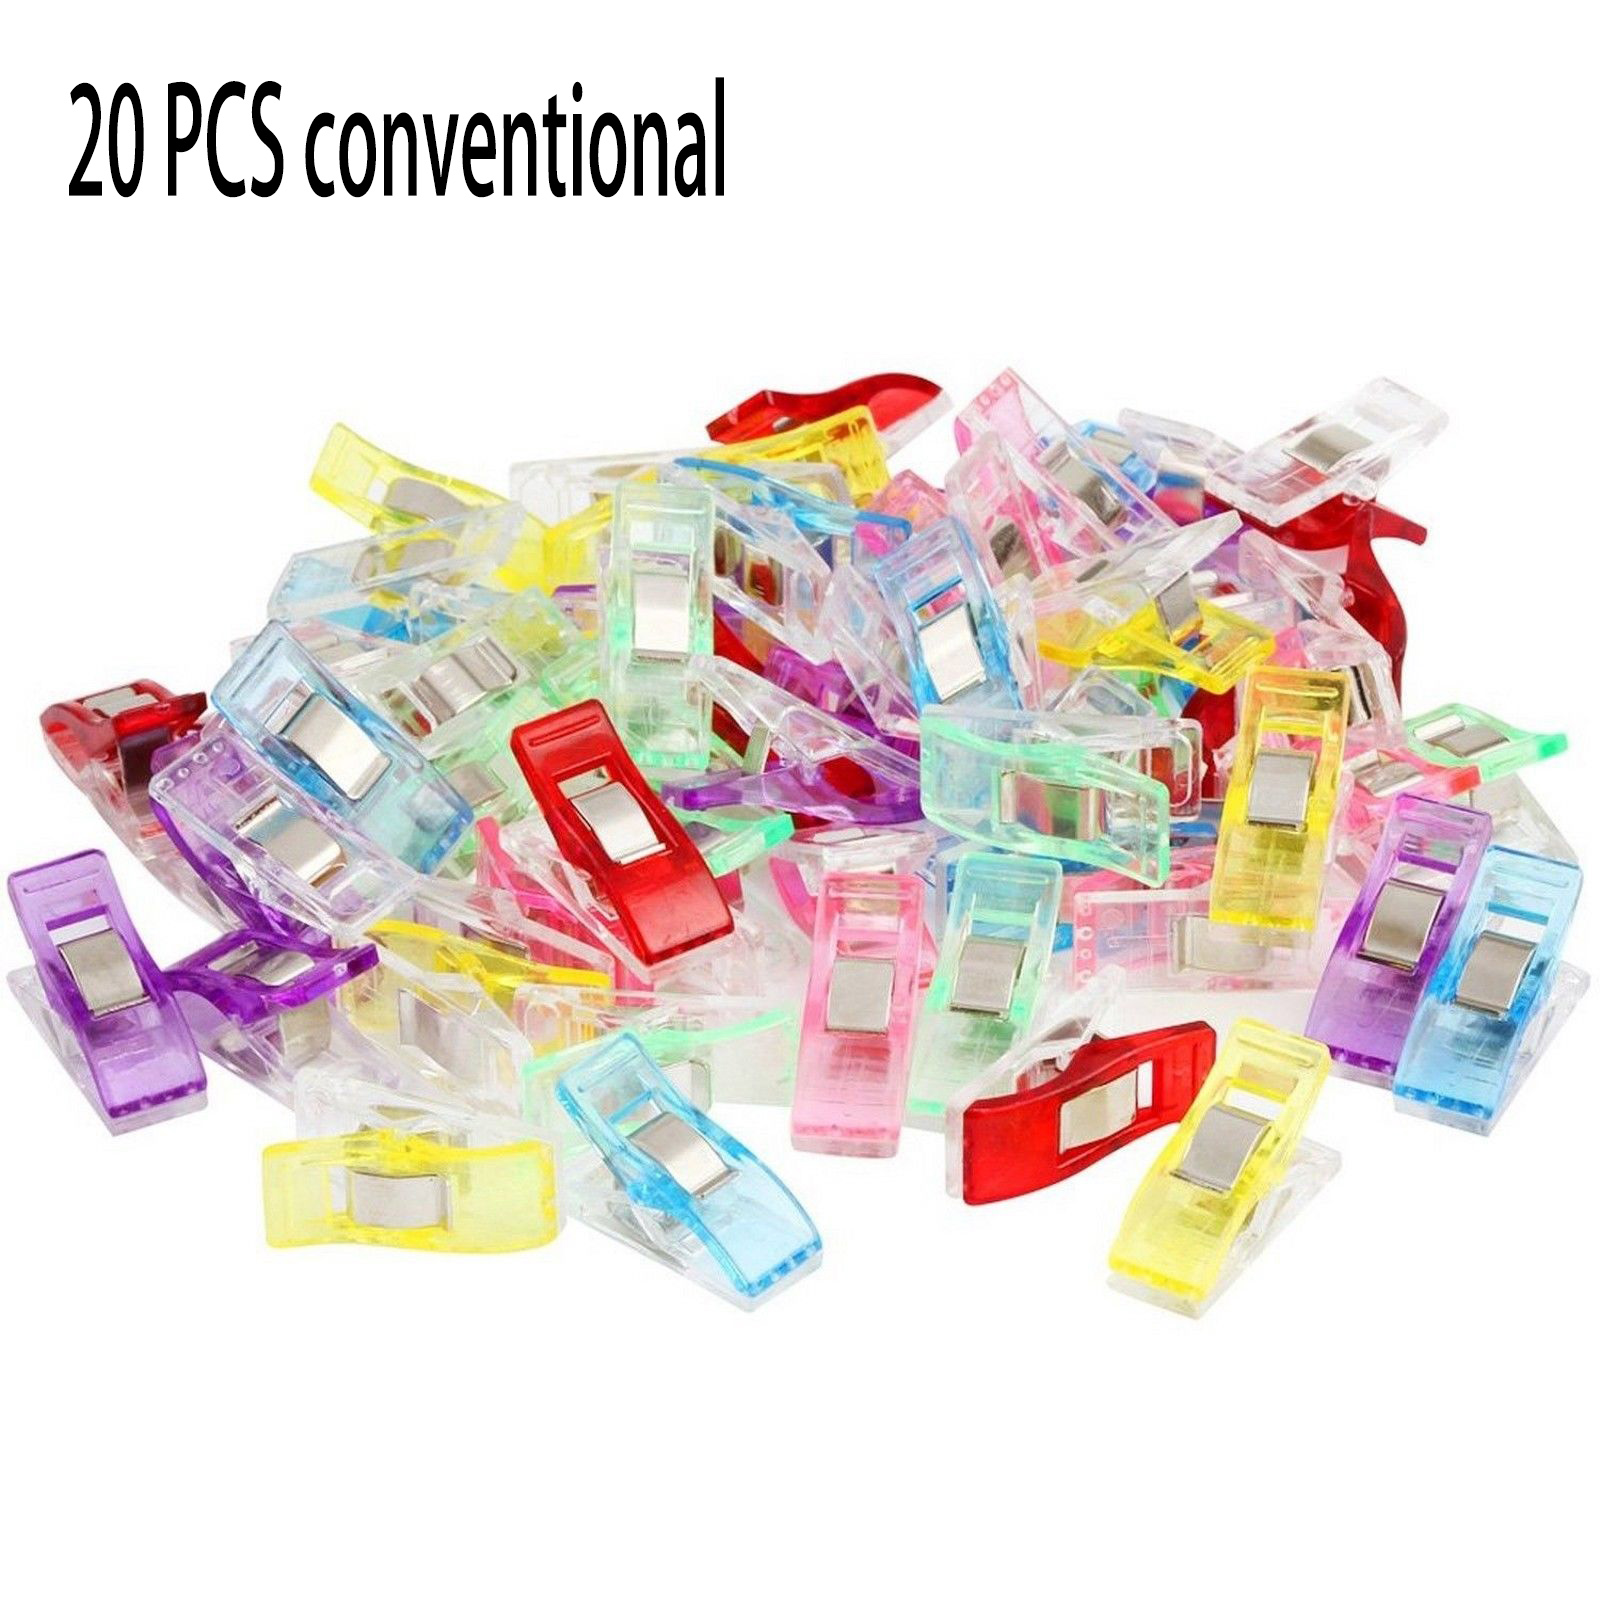 20/50/100PCS Multicolor Plastic Clips Quilt Quilting Clip Clover Clip For Patchwork Sewing Diy Crafts